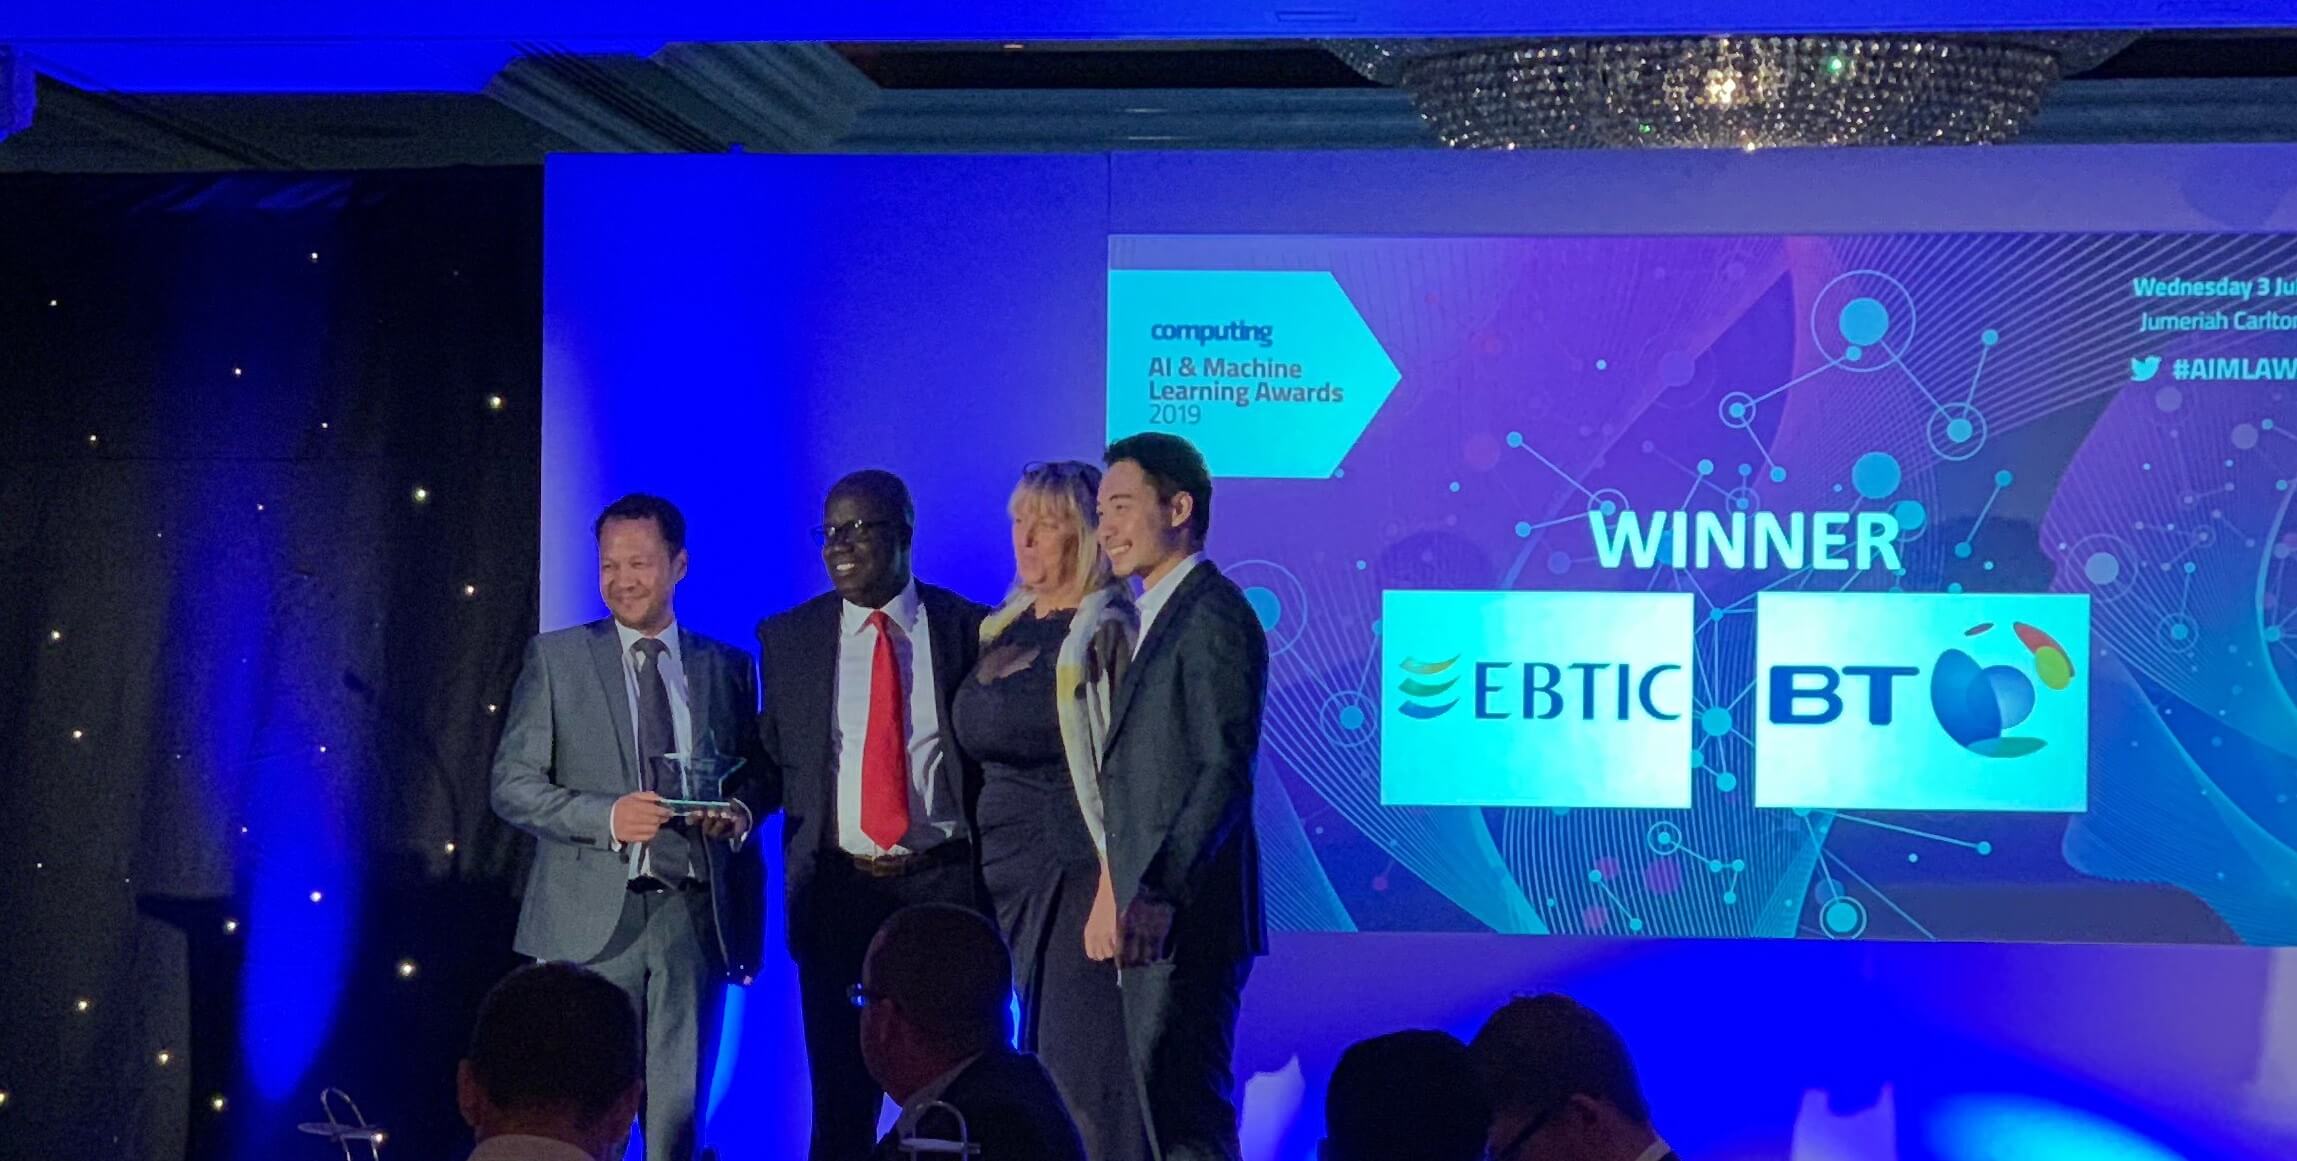 EBTIC Wins Two Awards at Computing AI & ML Machine Learning Awards 2019 for Intuitu Project